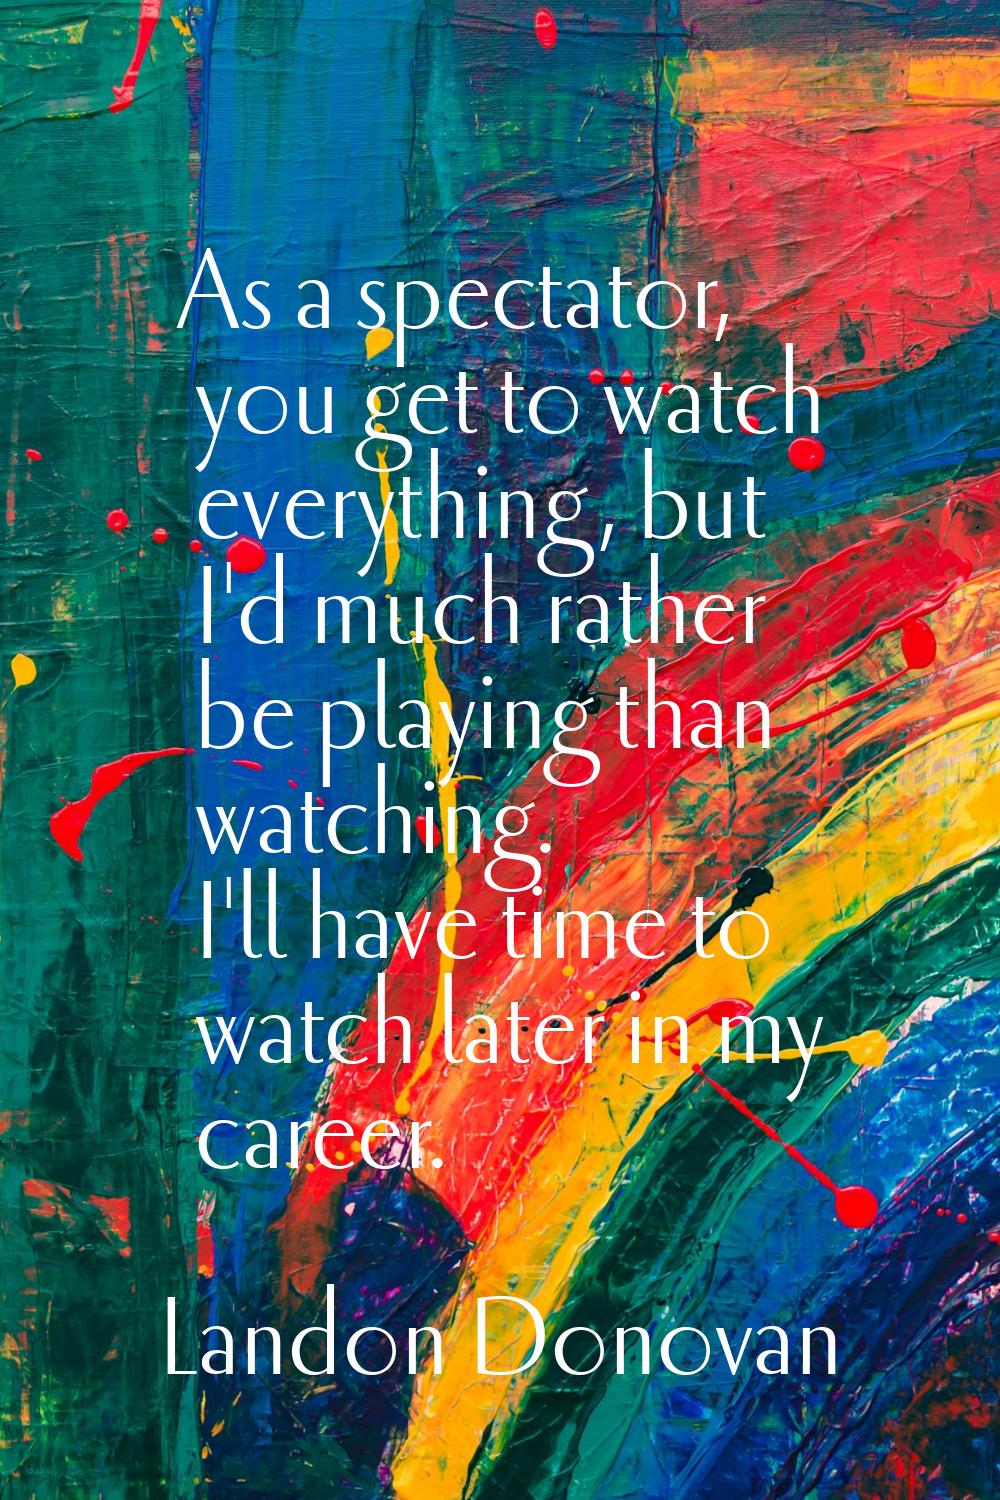 As a spectator, you get to watch everything, but I'd much rather be playing than watching. I'll hav